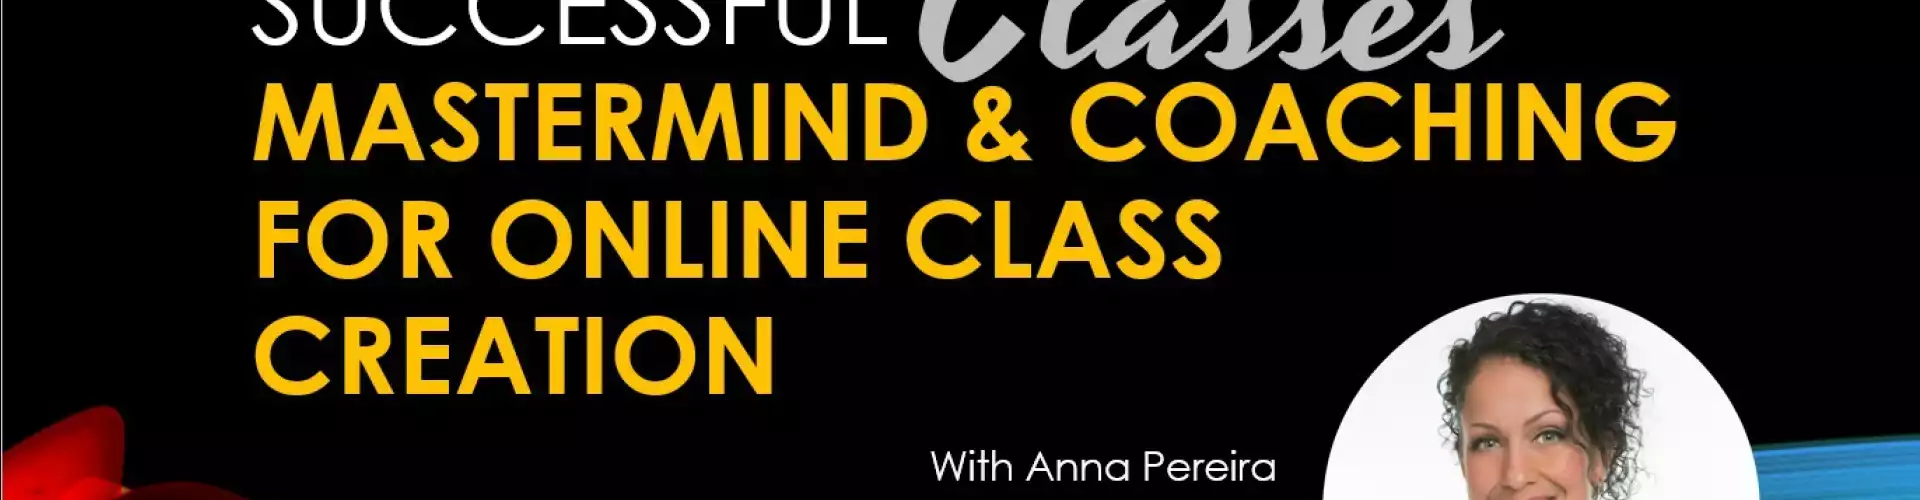 Mastermind & Coaching for Online Class Creation